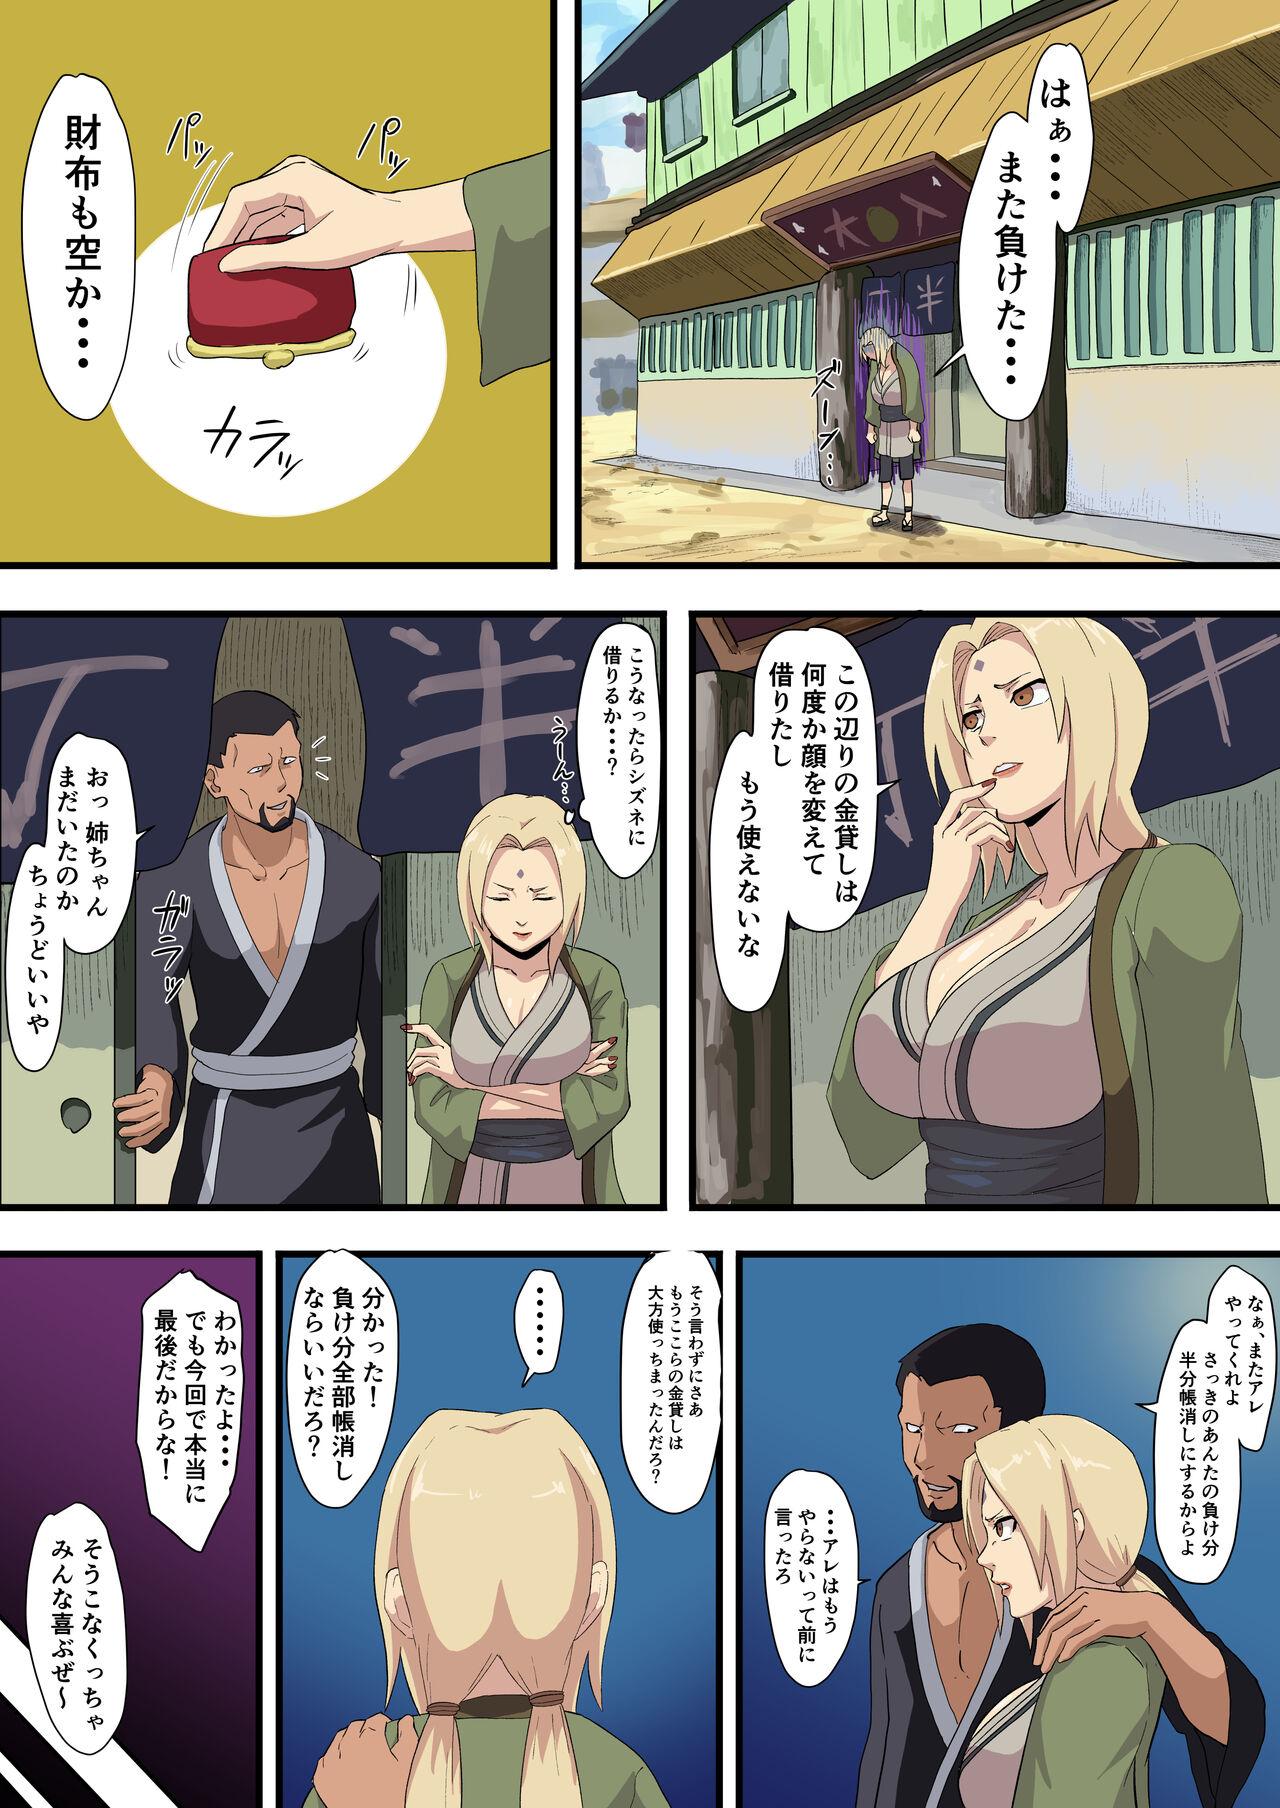 Hardcore Tsunade paying debt - Naruto Party - Picture 2